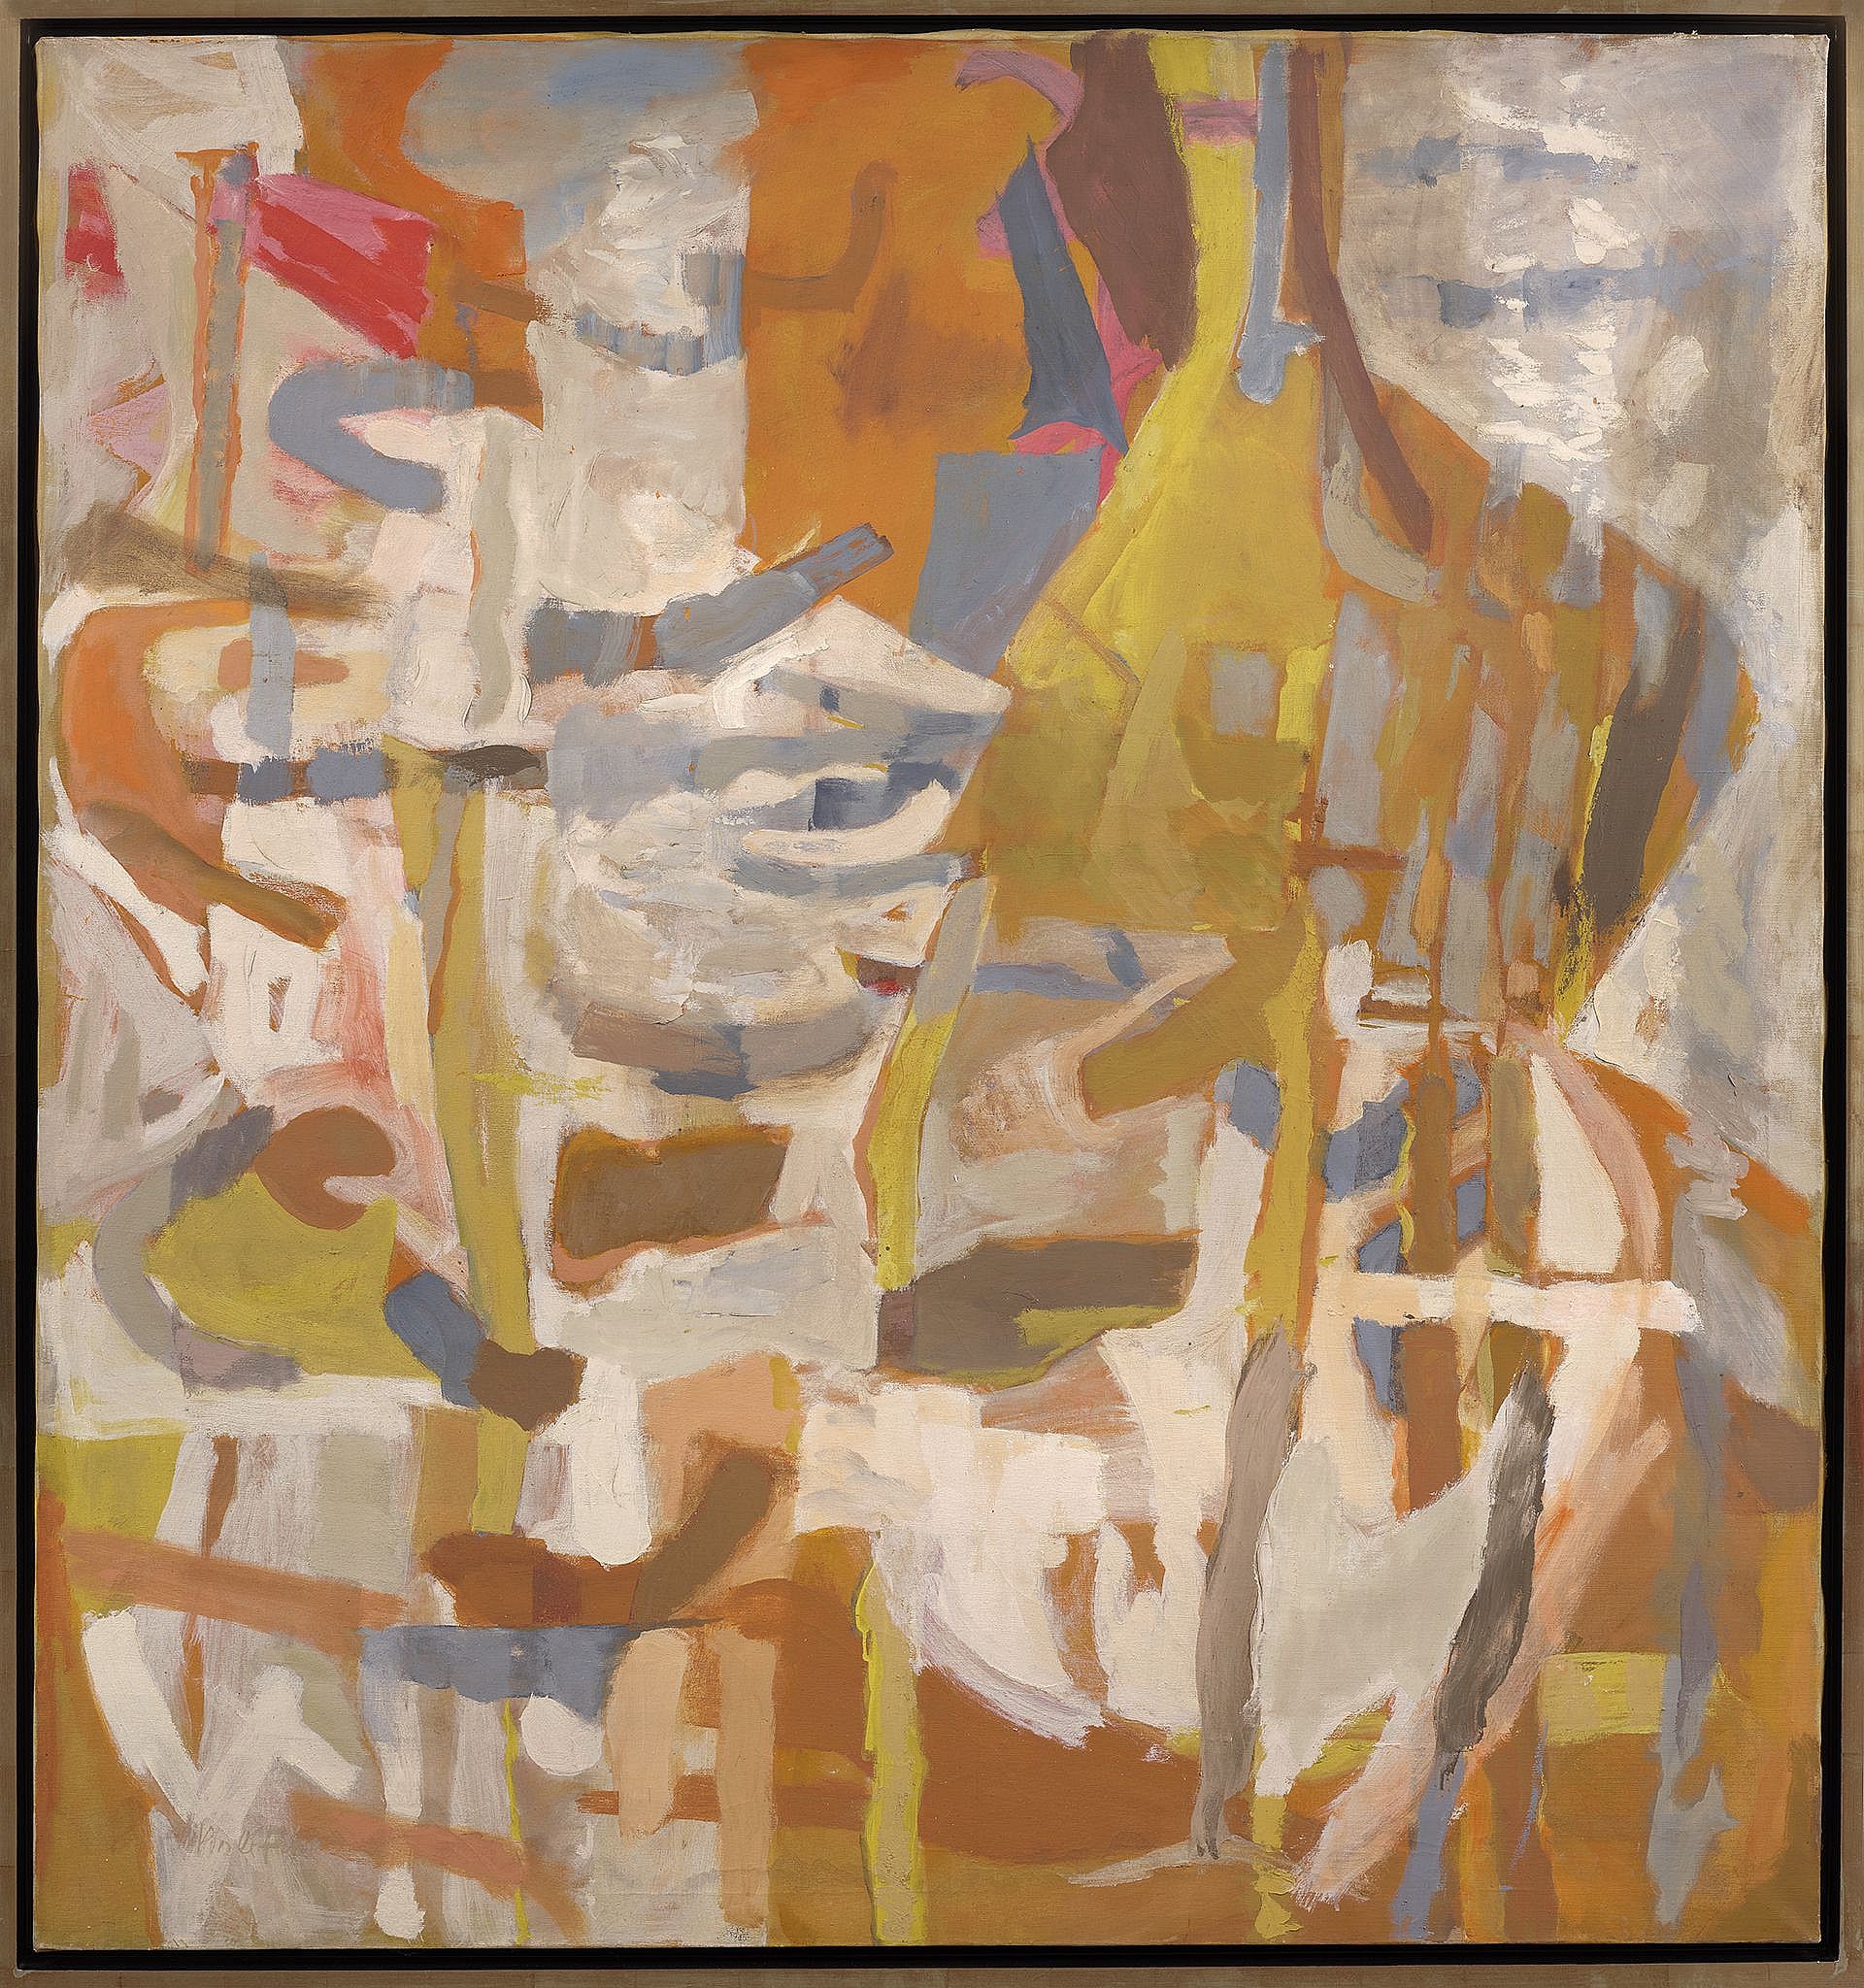 Perle Fine, Judith Godwin, Yvonne Thomas | Restoration conversations: Women Artists and the Abstract Revolution: Christian and Florence Levett on their collection of Women of Abstract Expressionism